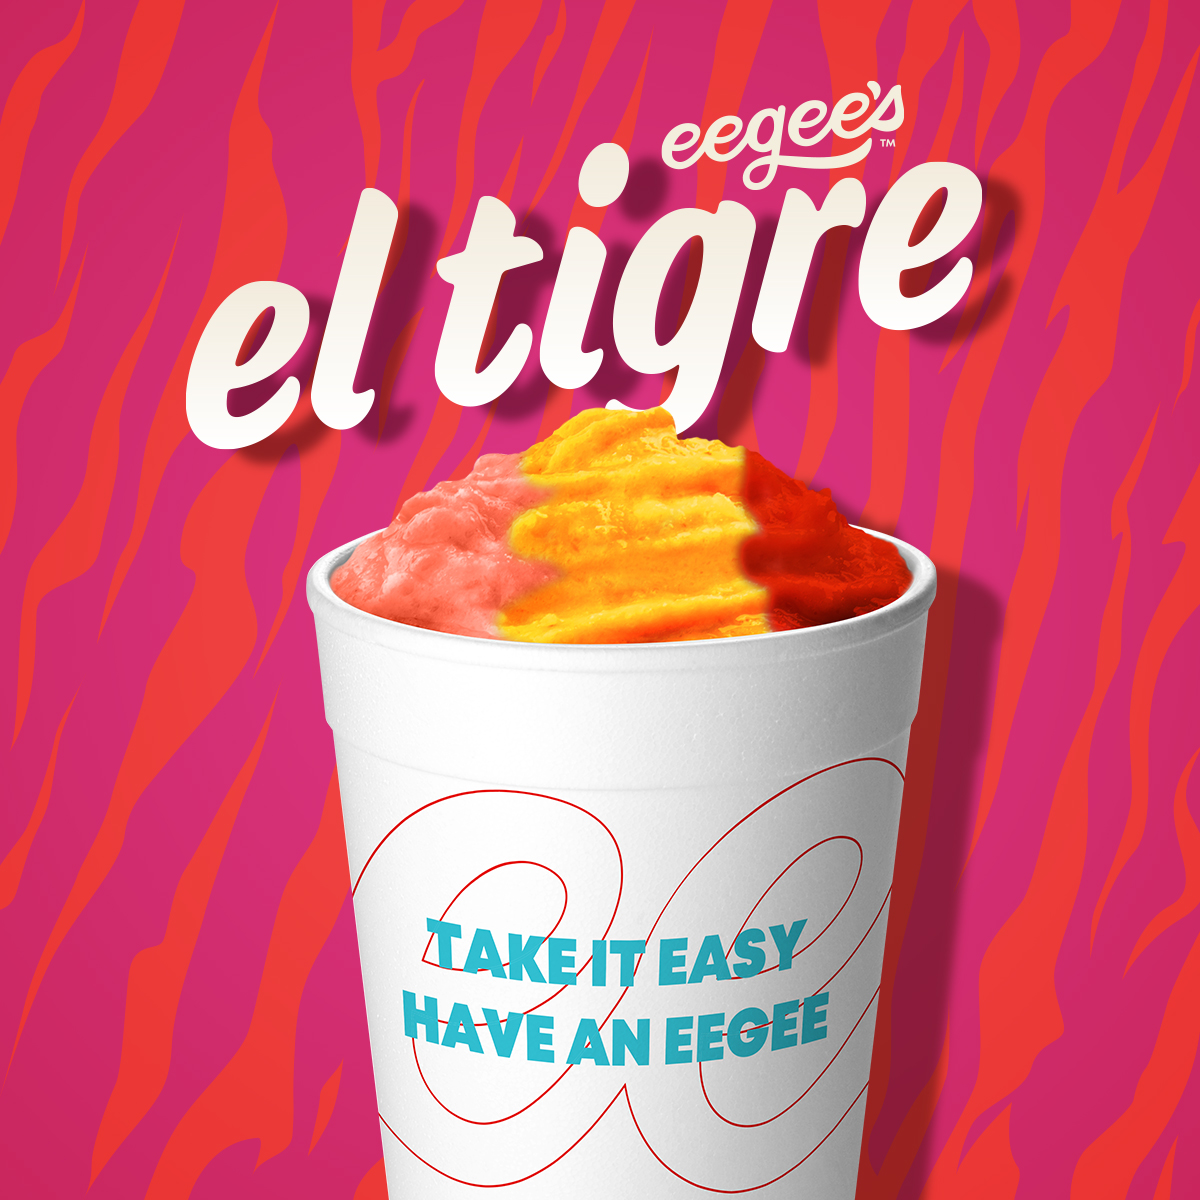 eegee's restaurant social media creative and strategy